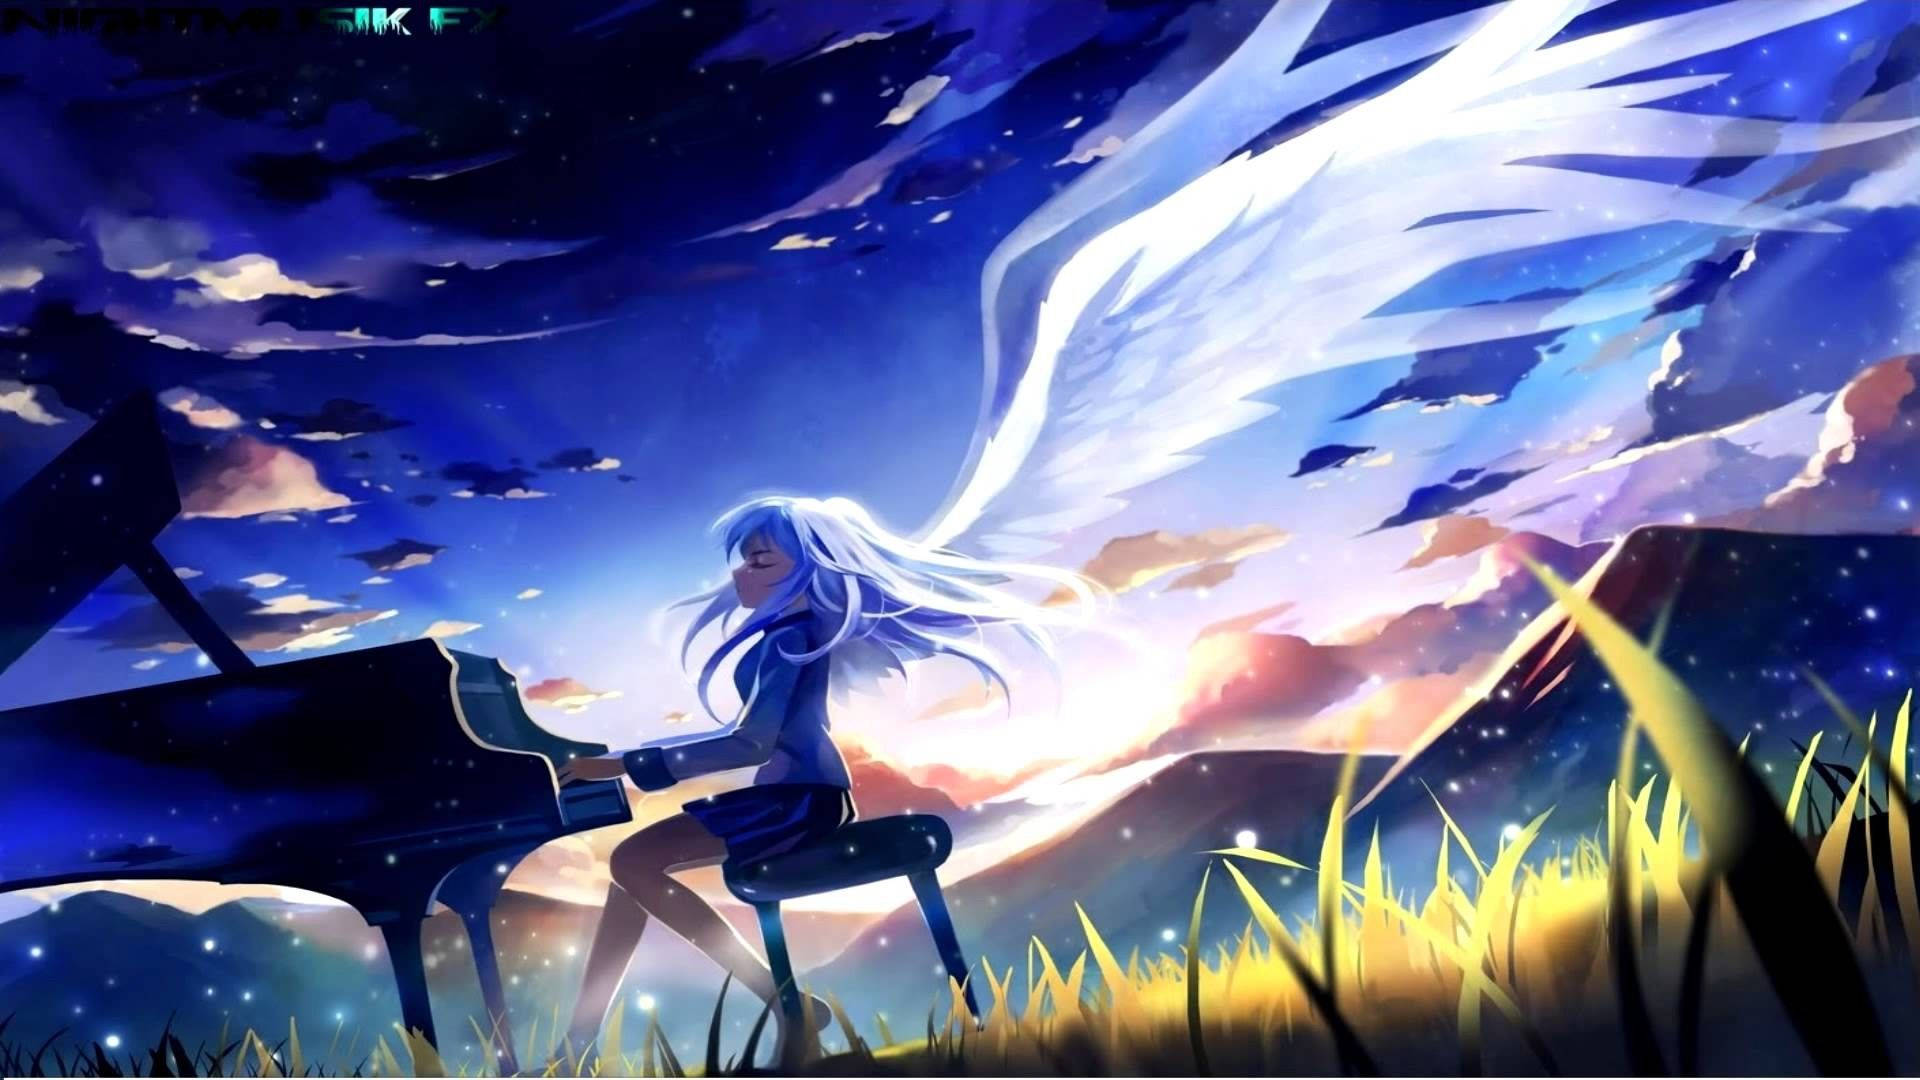 Cool Anime Girl With Wings Background